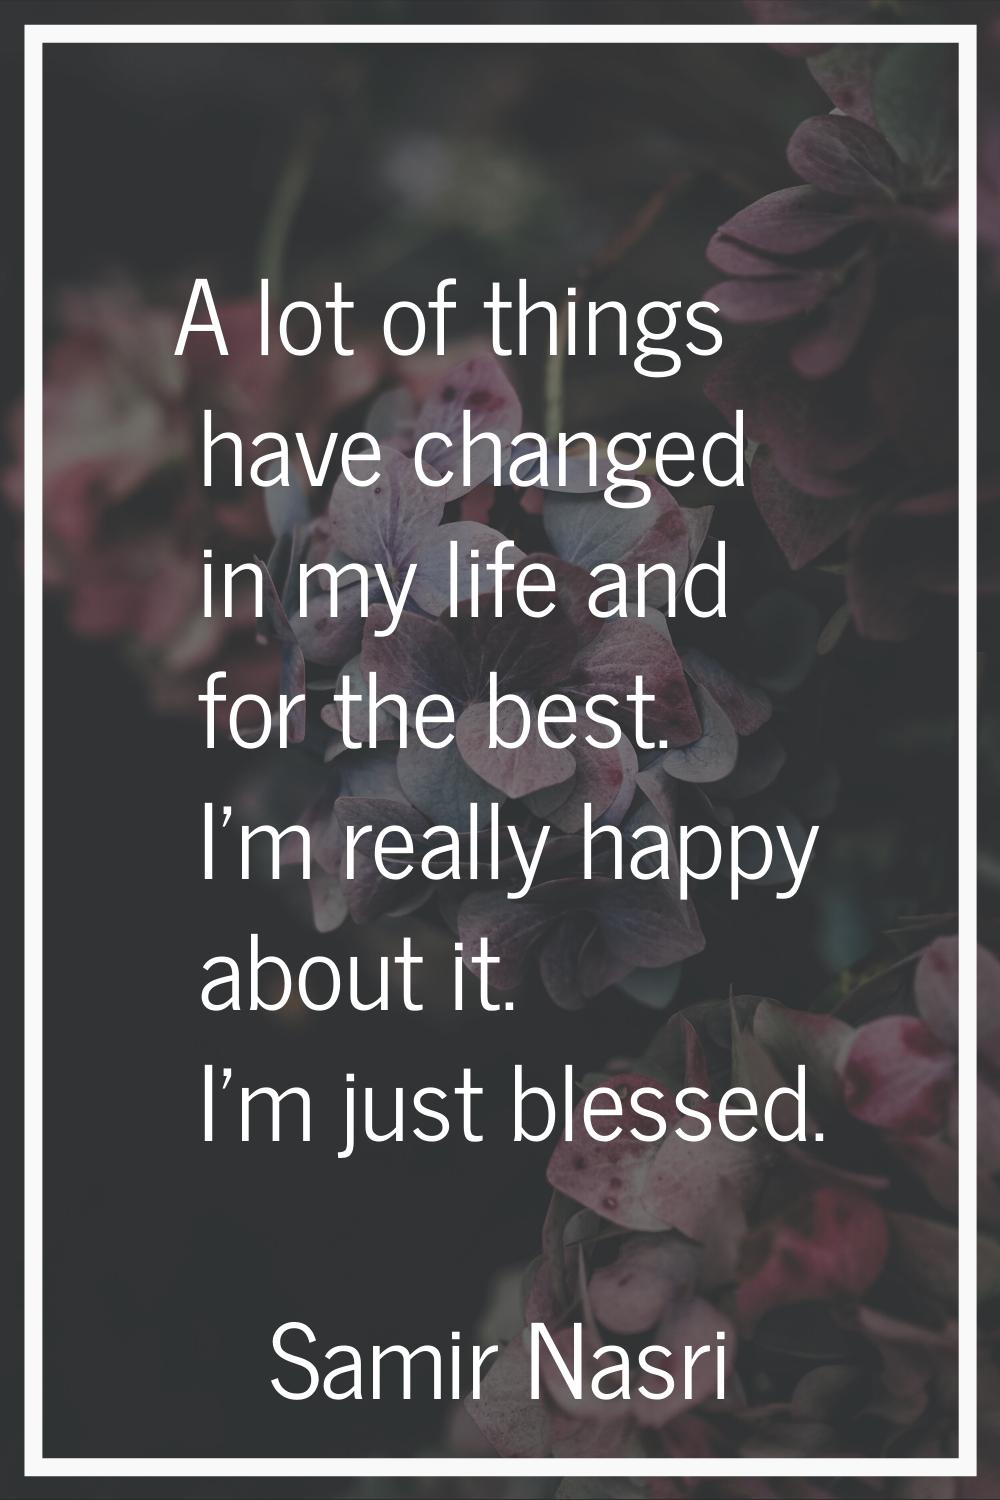 A lot of things have changed in my life and for the best. I'm really happy about it. I'm just bless